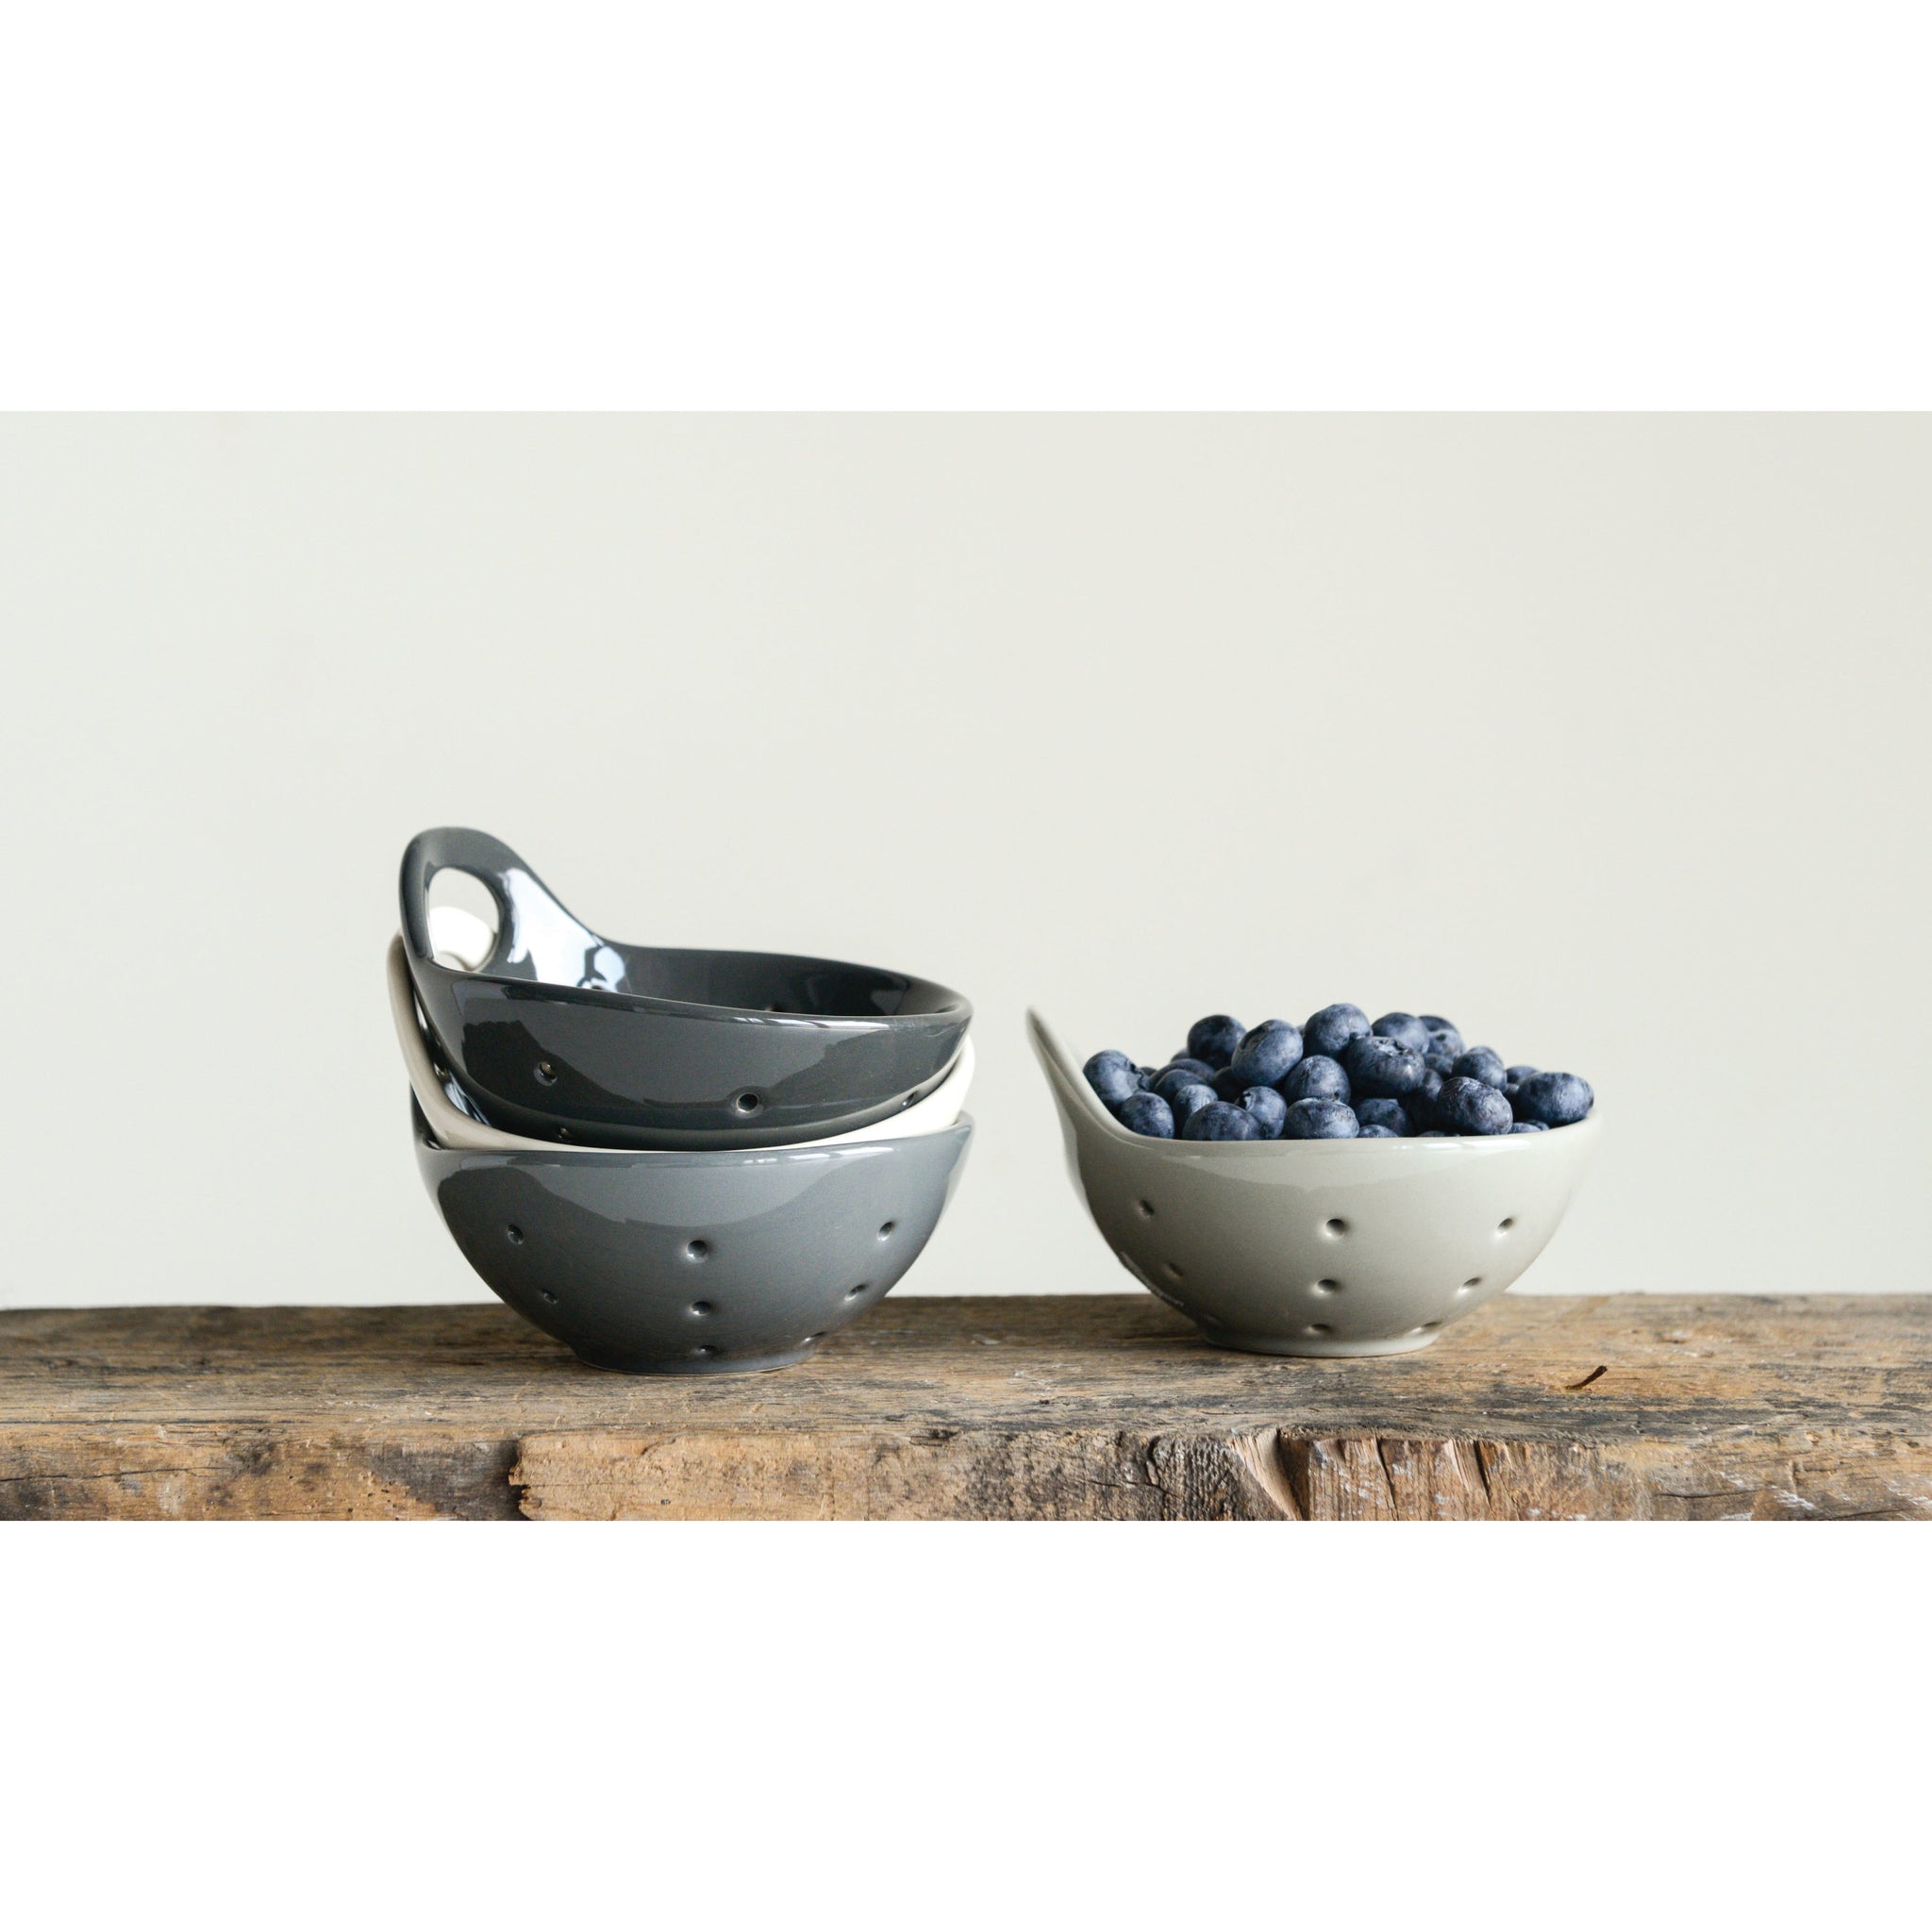 5” Berry Bowls - Earth Tone Colors